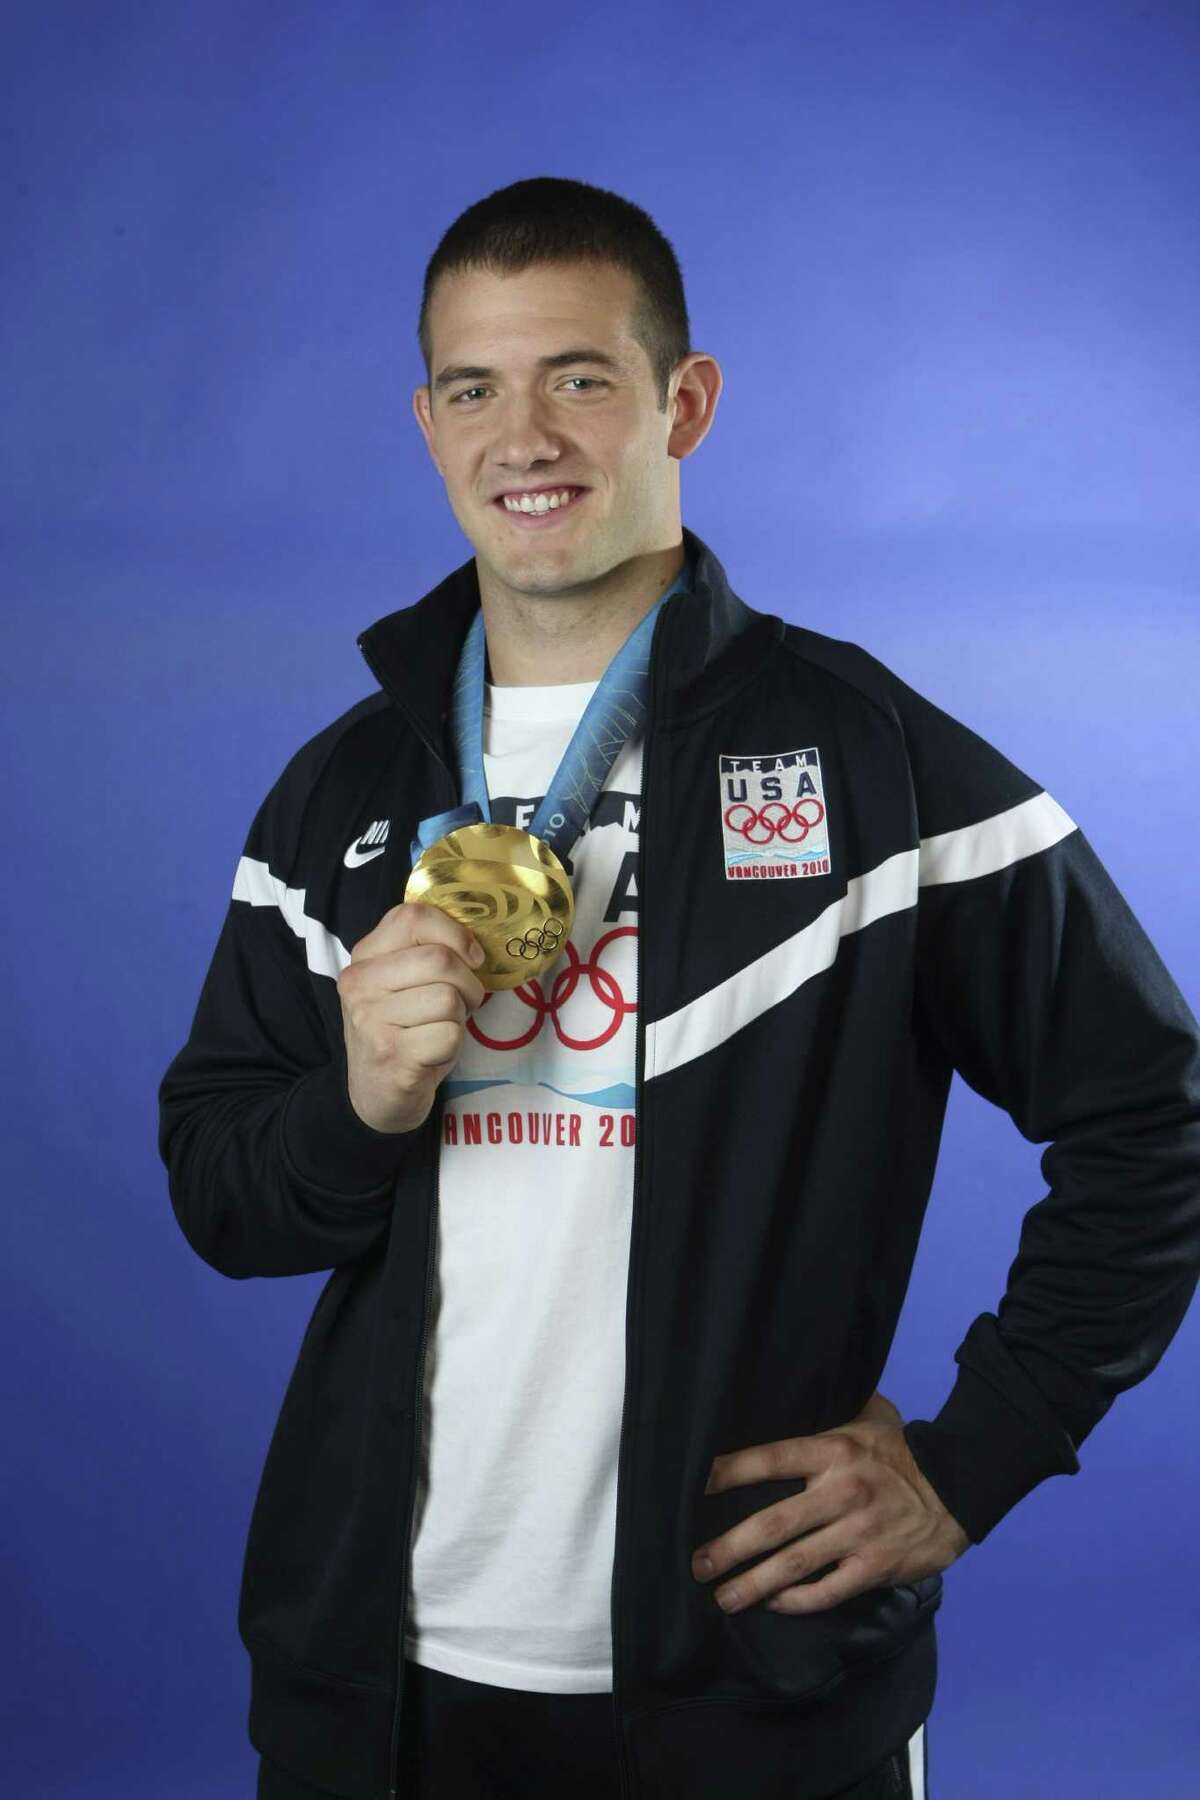 O'Connor grad Justin Olsen doesn't spend too much time dwelling on the gold medal he won in 2010.